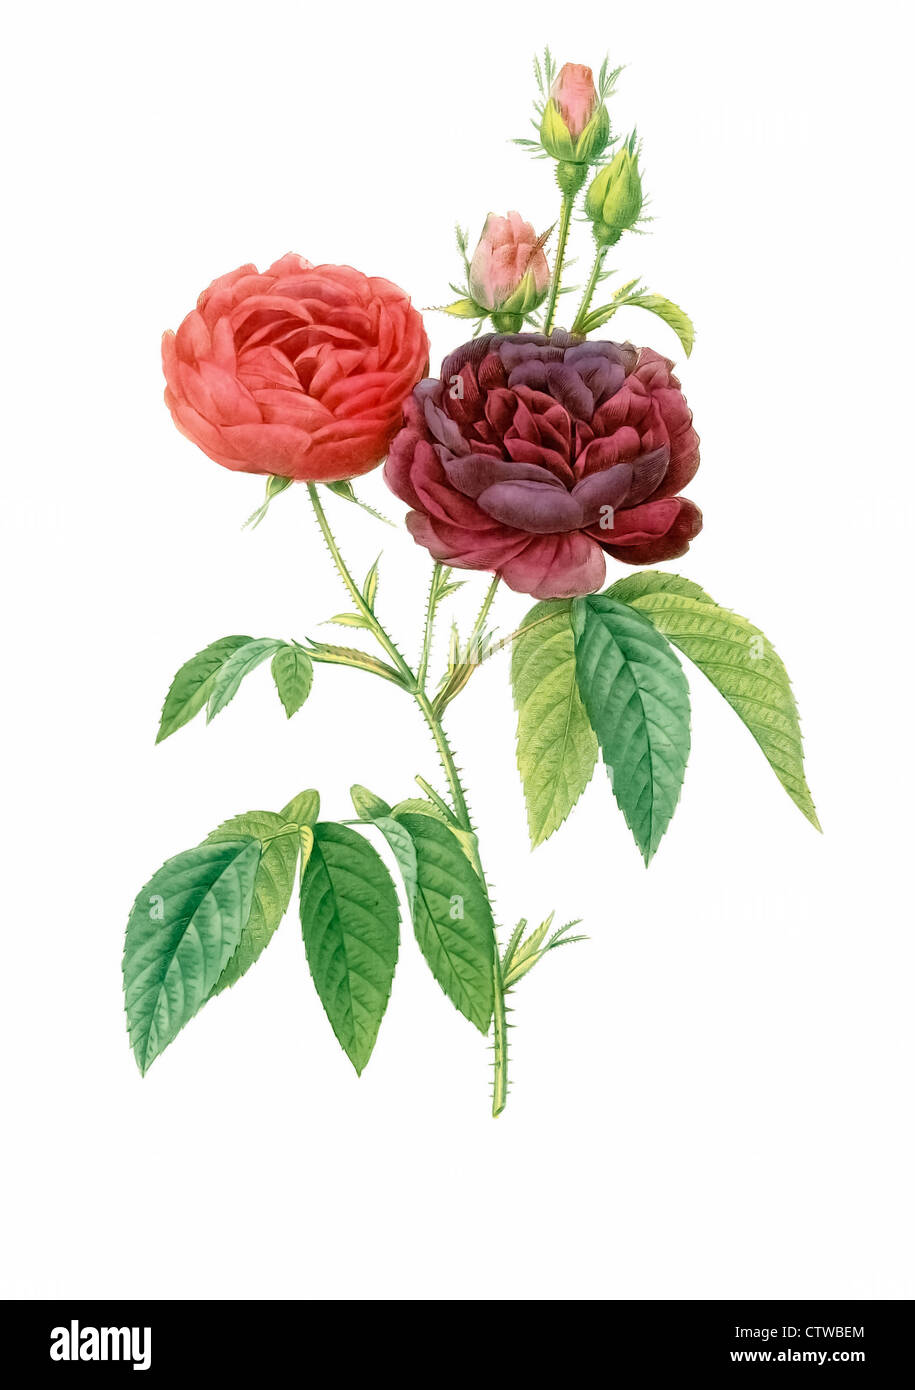 Illustration of Rosa gallica, Gallic Rose, French Rose, Rose of Provins or Apothecary's Rose or the 'Red Rose of Lancaster'. Stock Photo